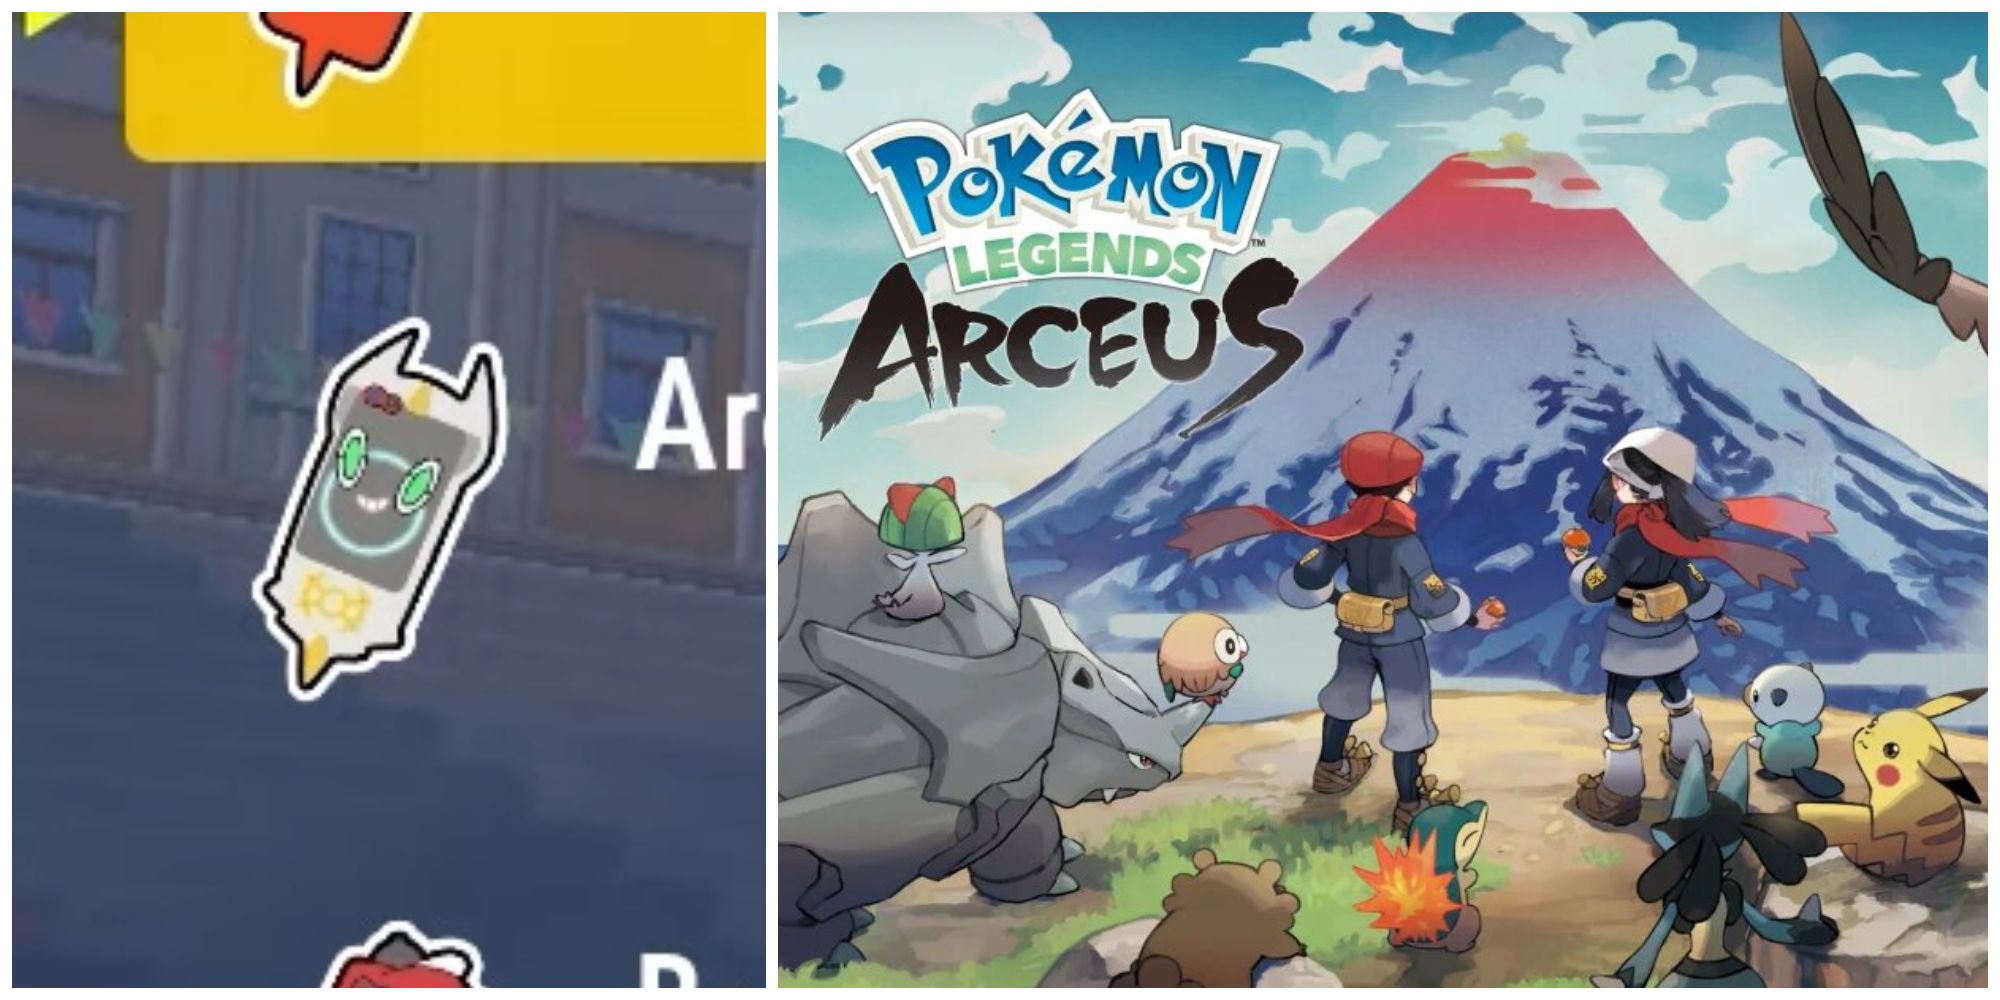 Split image of the Arc Phone Case in Pokemon Scarlet & Violet and the cover art for Pokemon Legends: Arceus.